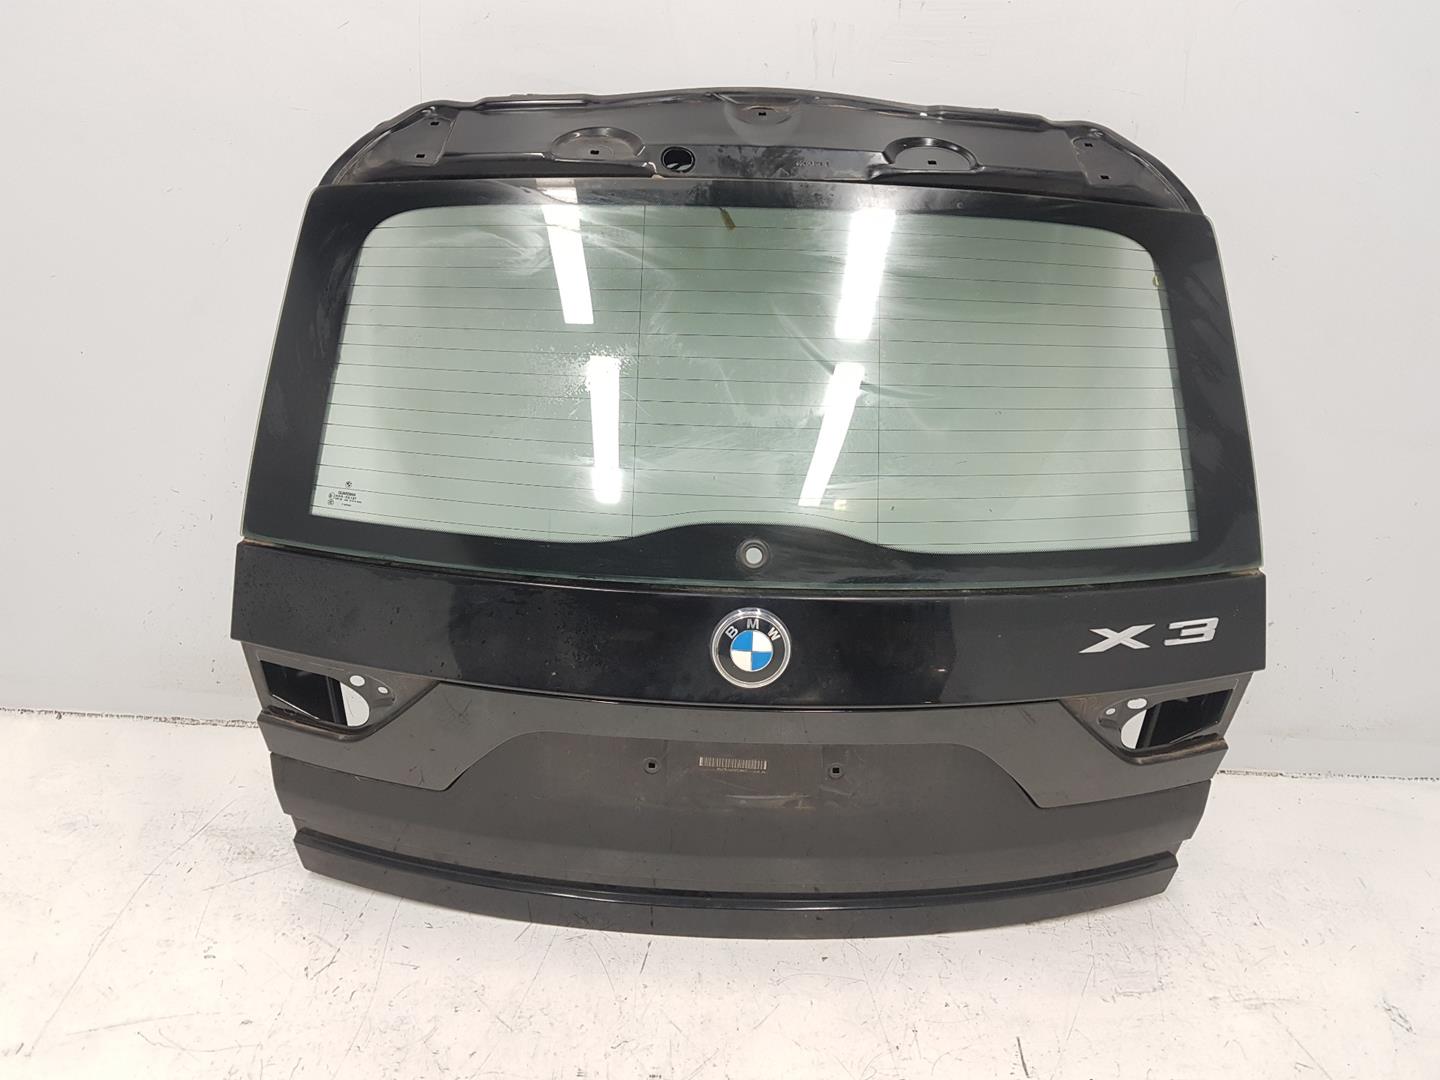 BMW X3 E83 (2003-2010) Bootlid Rear Boot 41003452197, 3452197, COLORNEGRO668 23799412